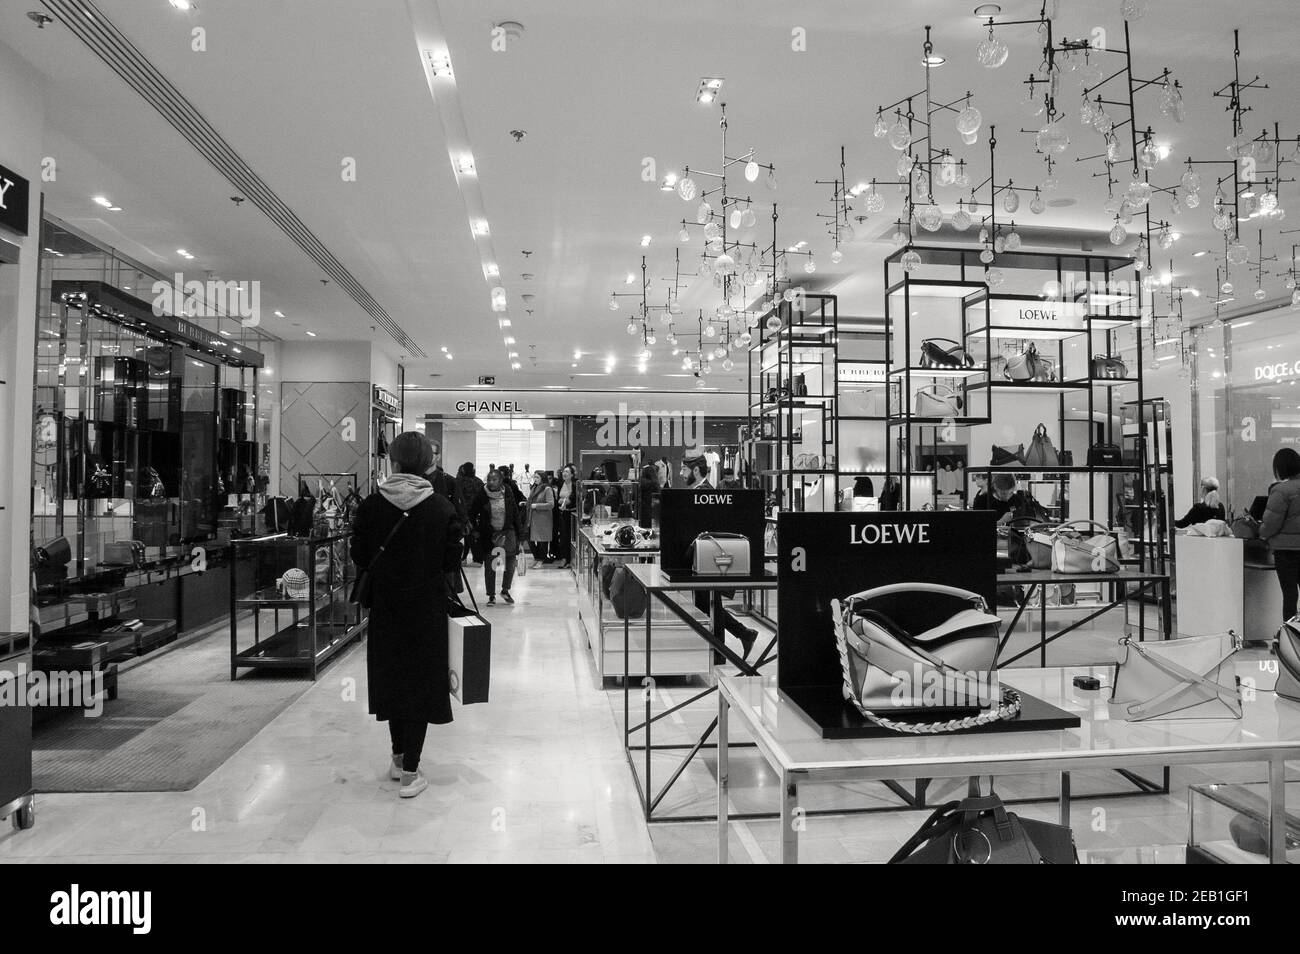 PARIS, FRANCE - JANUARY 27, 2018: People in shopping in Printemps department store. Loewe and Chanel boutiques. Black and white photo. Stock Photo